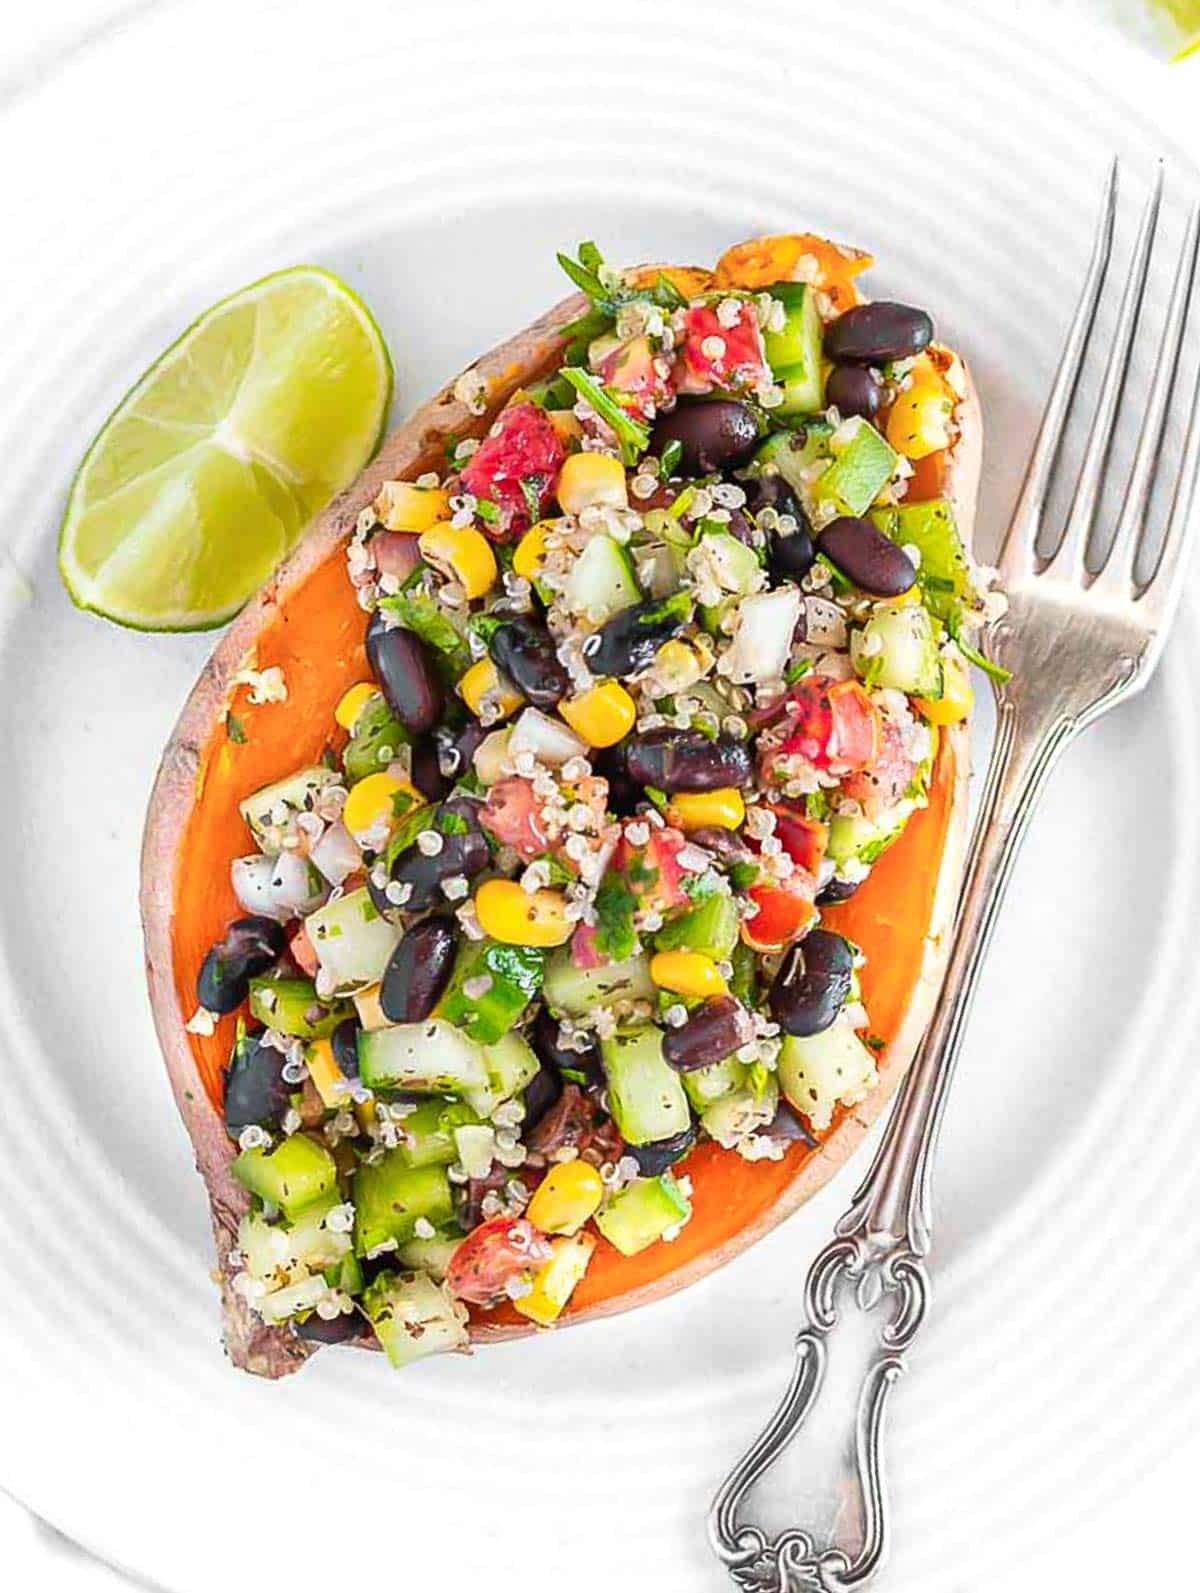 Microwave sweet potato with black bean topping